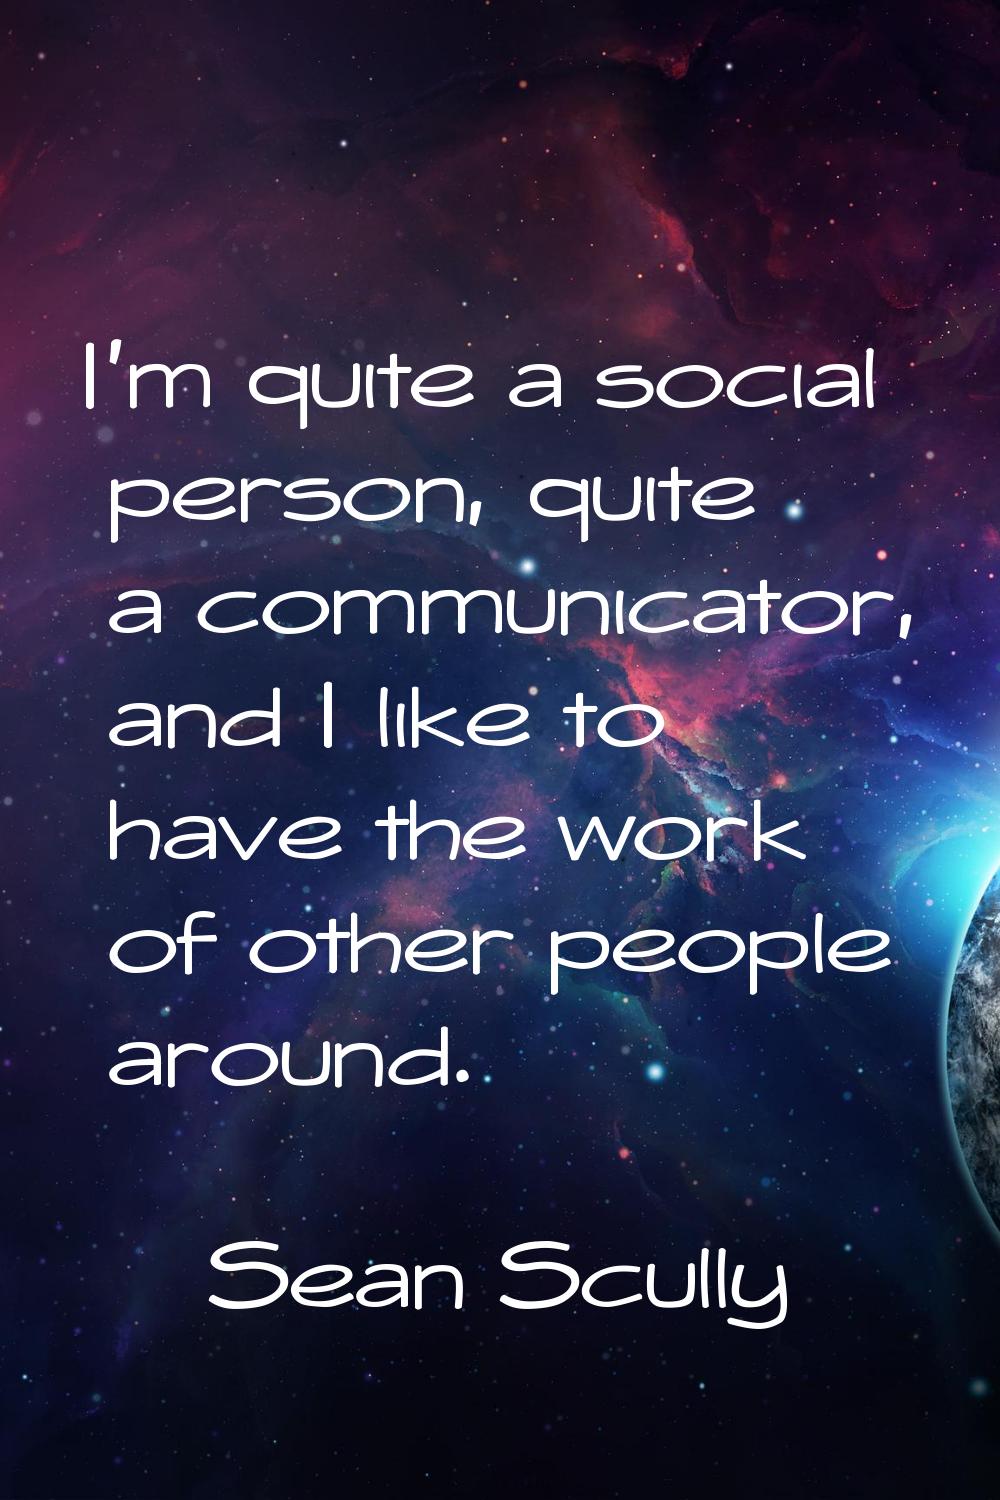 I'm quite a social person, quite a communicator, and I like to have the work of other people around